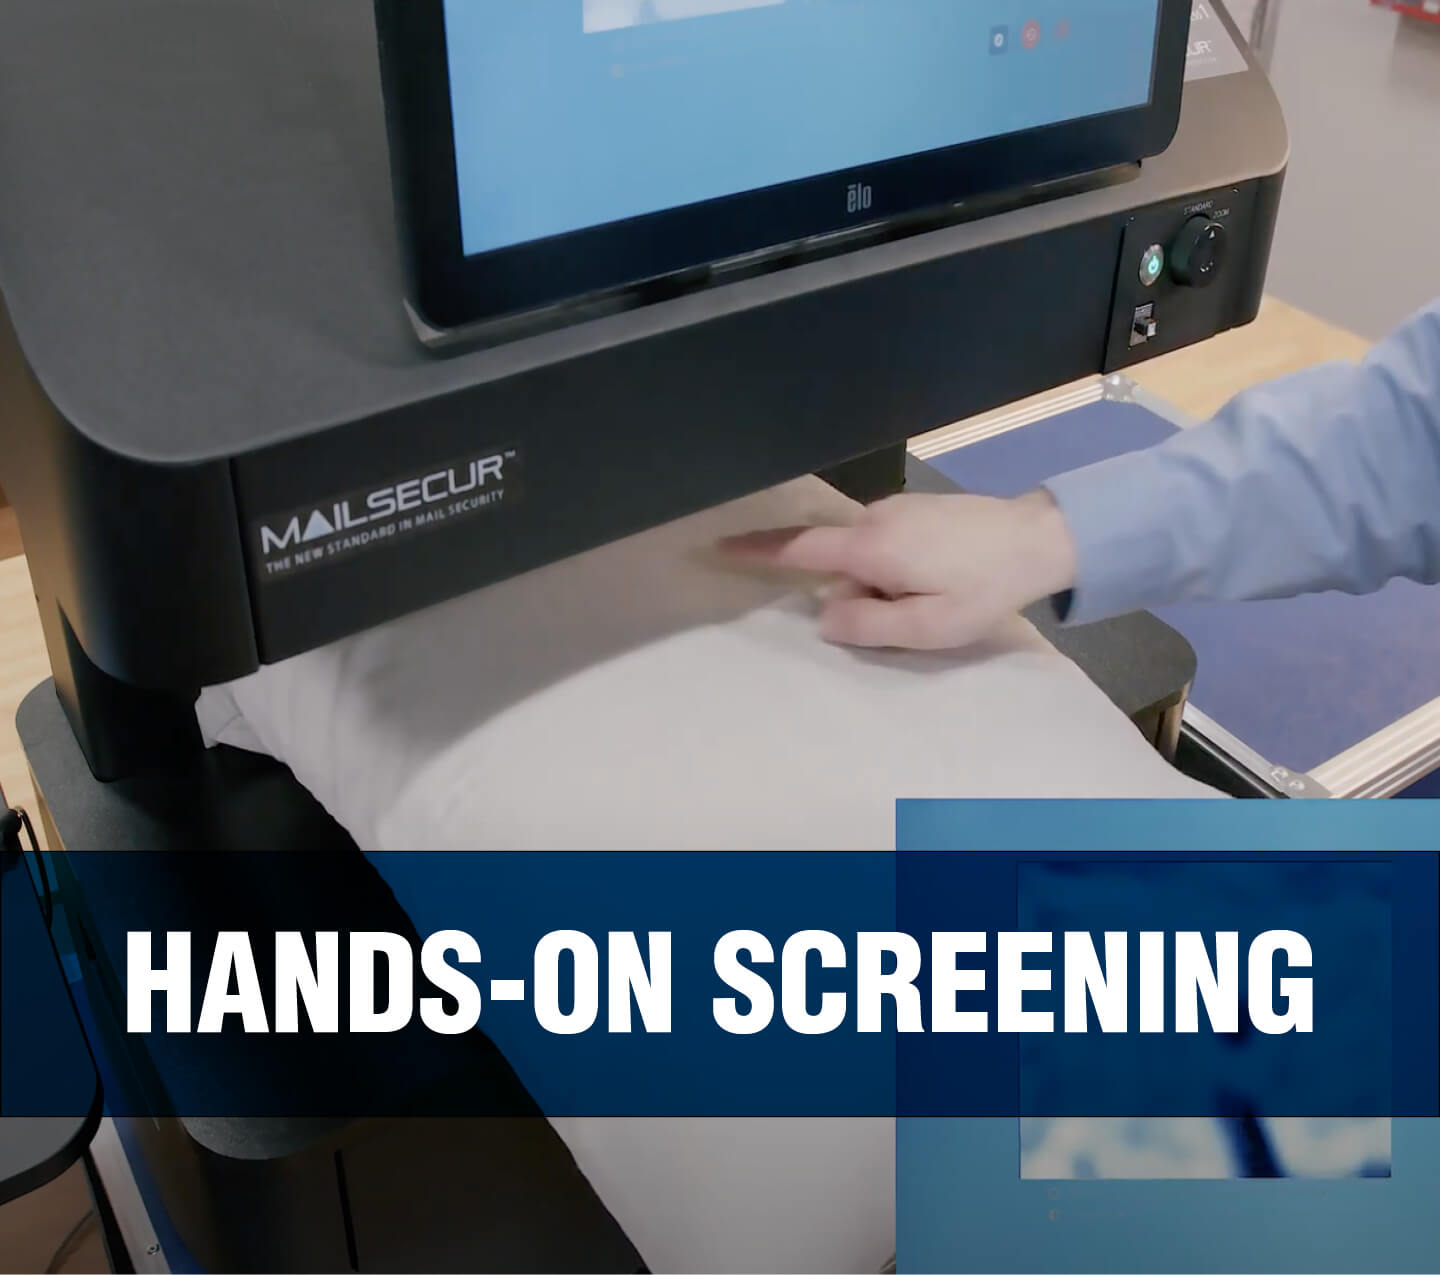 Hands-on-screening imagery over MailSecur device screening